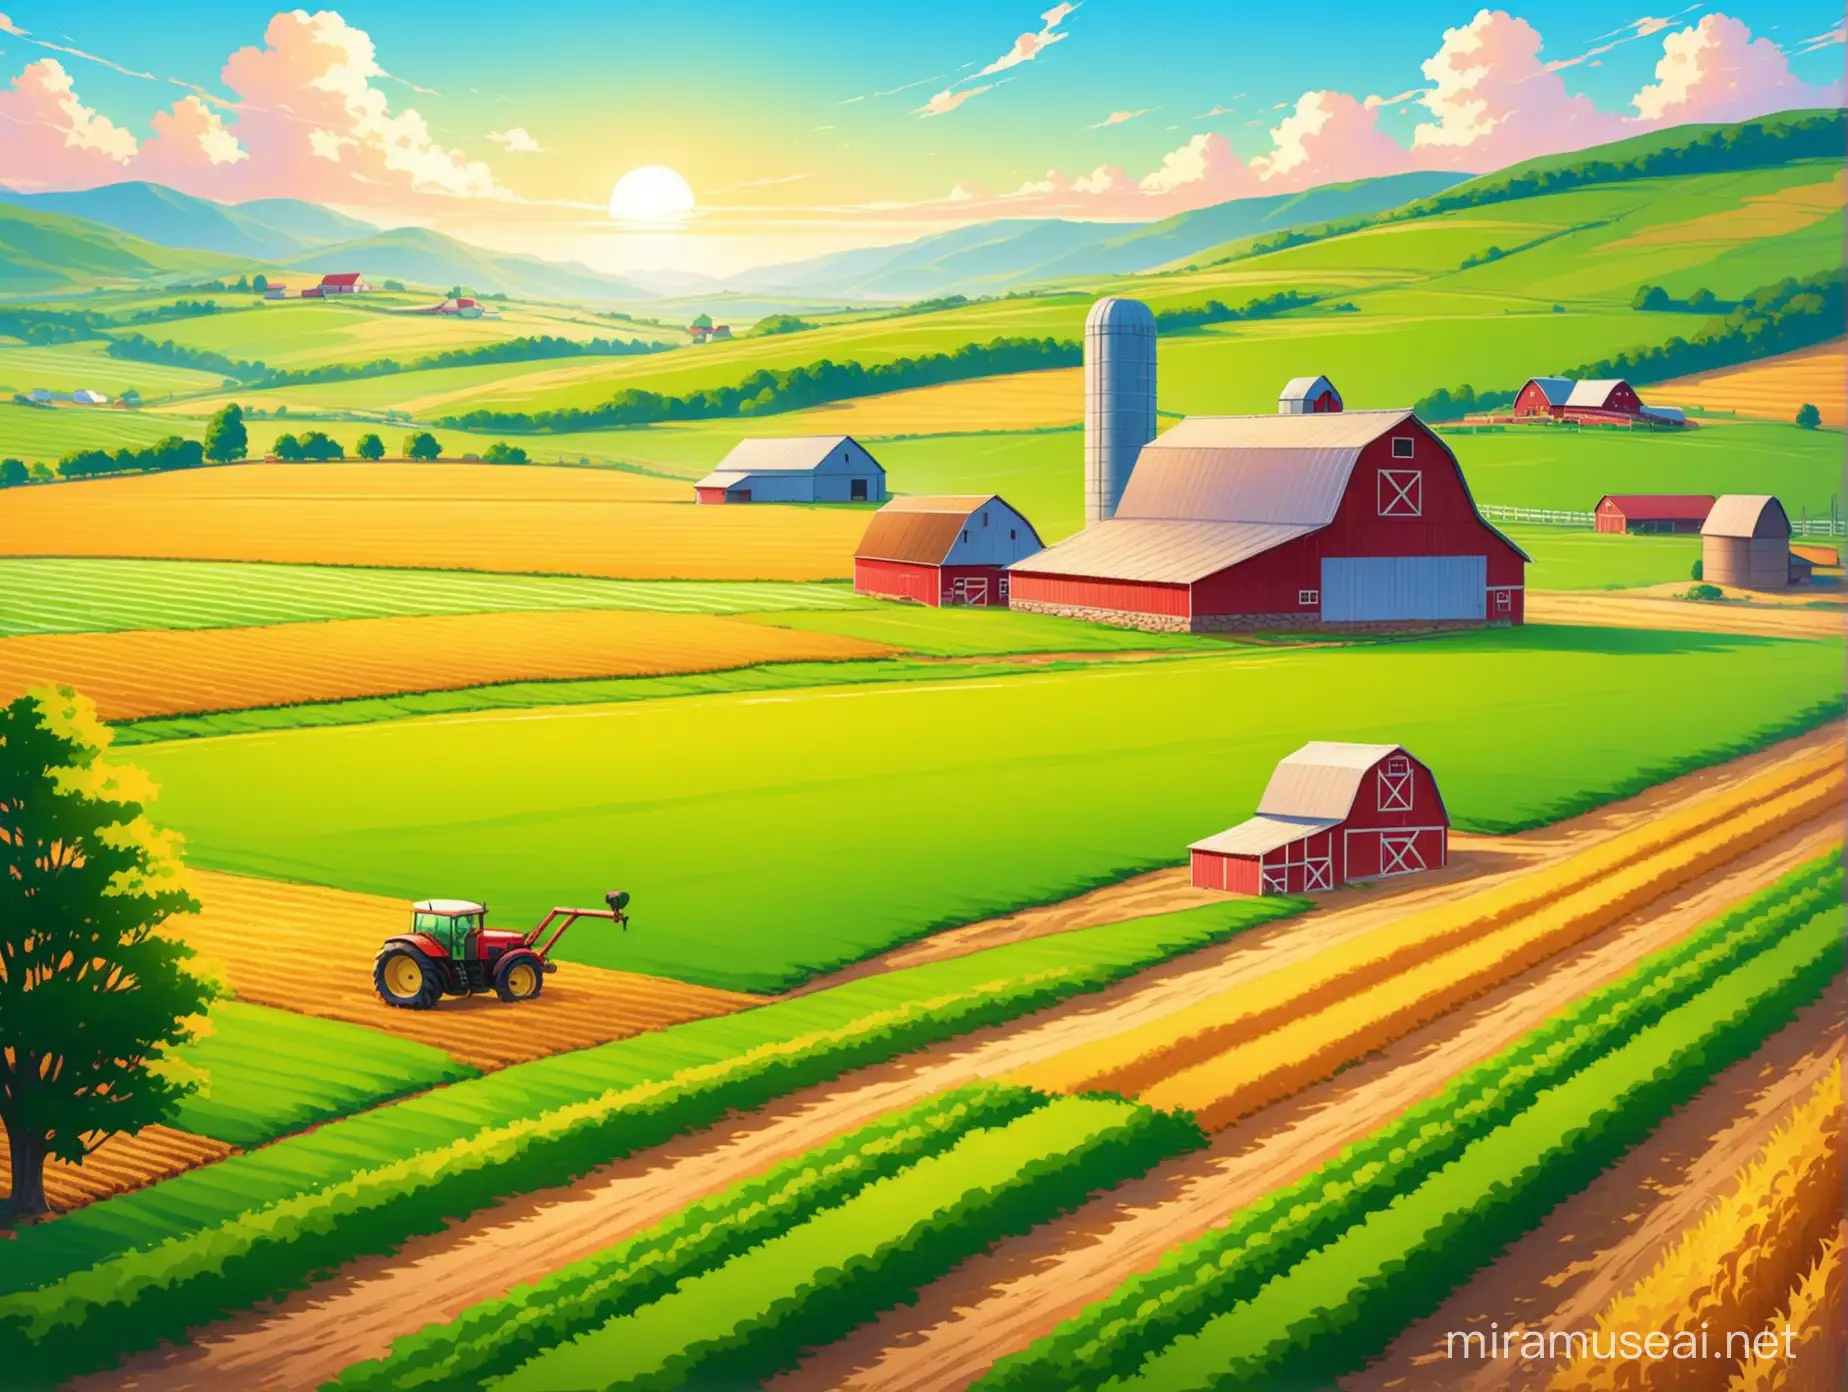 Colorful Farm Life Vibrant Illustration of Animals Crops and Barns